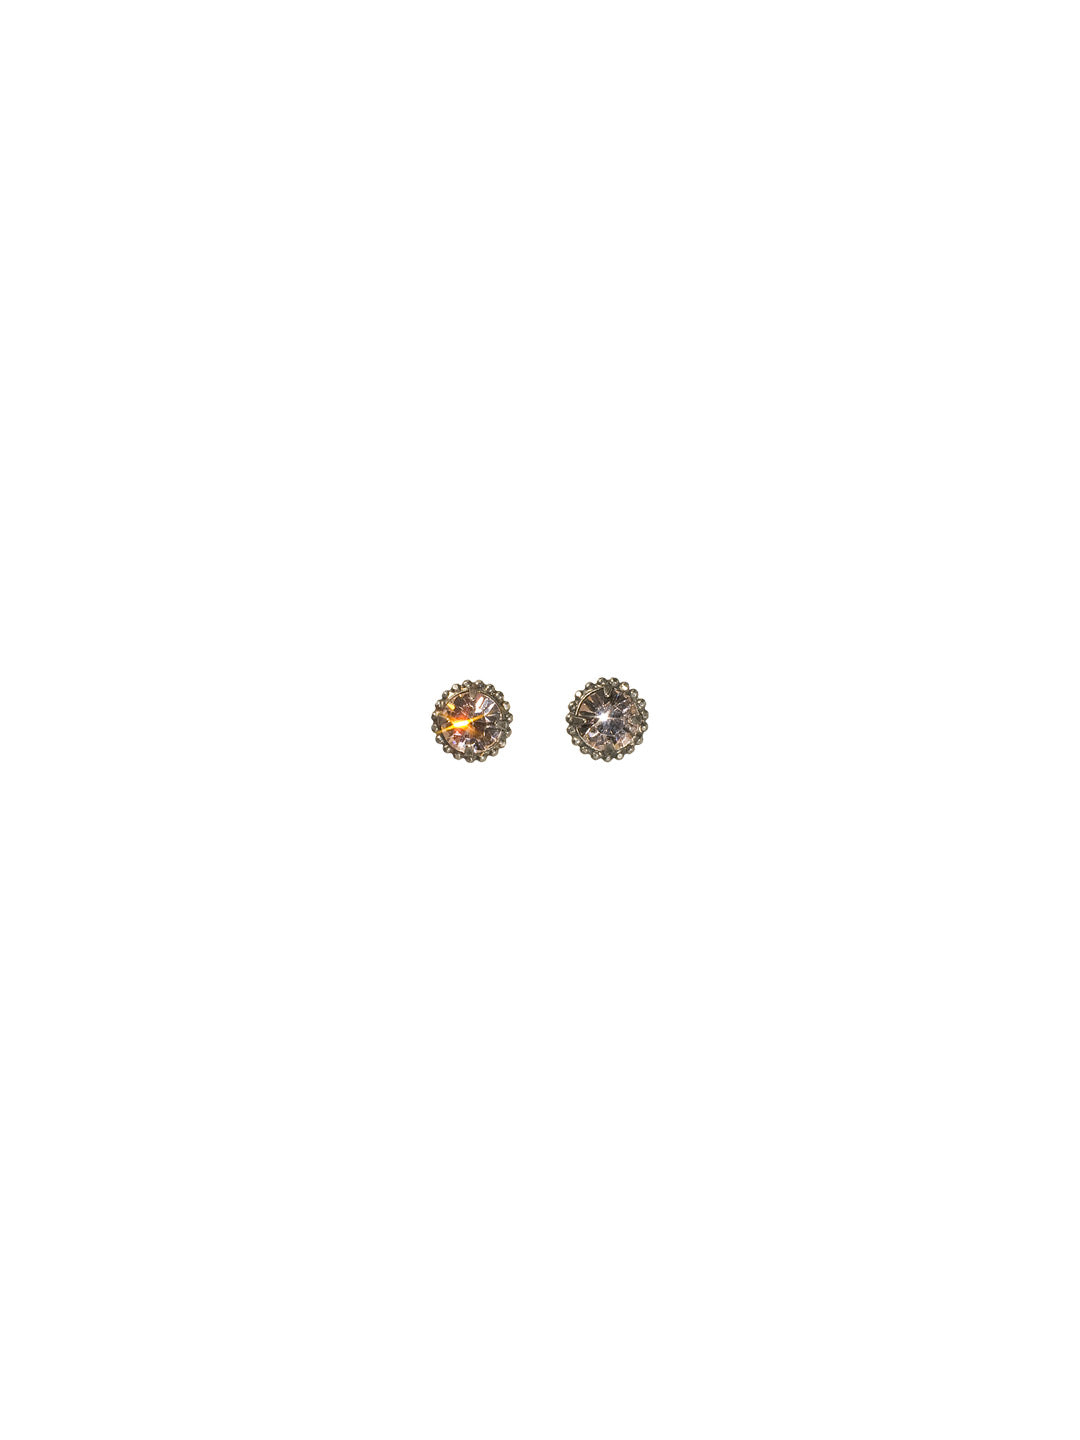 Simplicity Stud Earrings - EBY38ASSNB - <p>A timeless classic, the Simplicity Stud Earrings feature round cut crystals in a variety of colors; accented with a halo of metal beaded detail. Need help picking a stud? <a href="https://www.sorrelli.com/blogs/sisterhood/round-stud-earrings-101-a-rundown-of-sizes-styles-and-sparkle">Check out our size guide!</a> From Sorrelli's Snow Bunny collection in our Antique Silver-tone finish.</p>